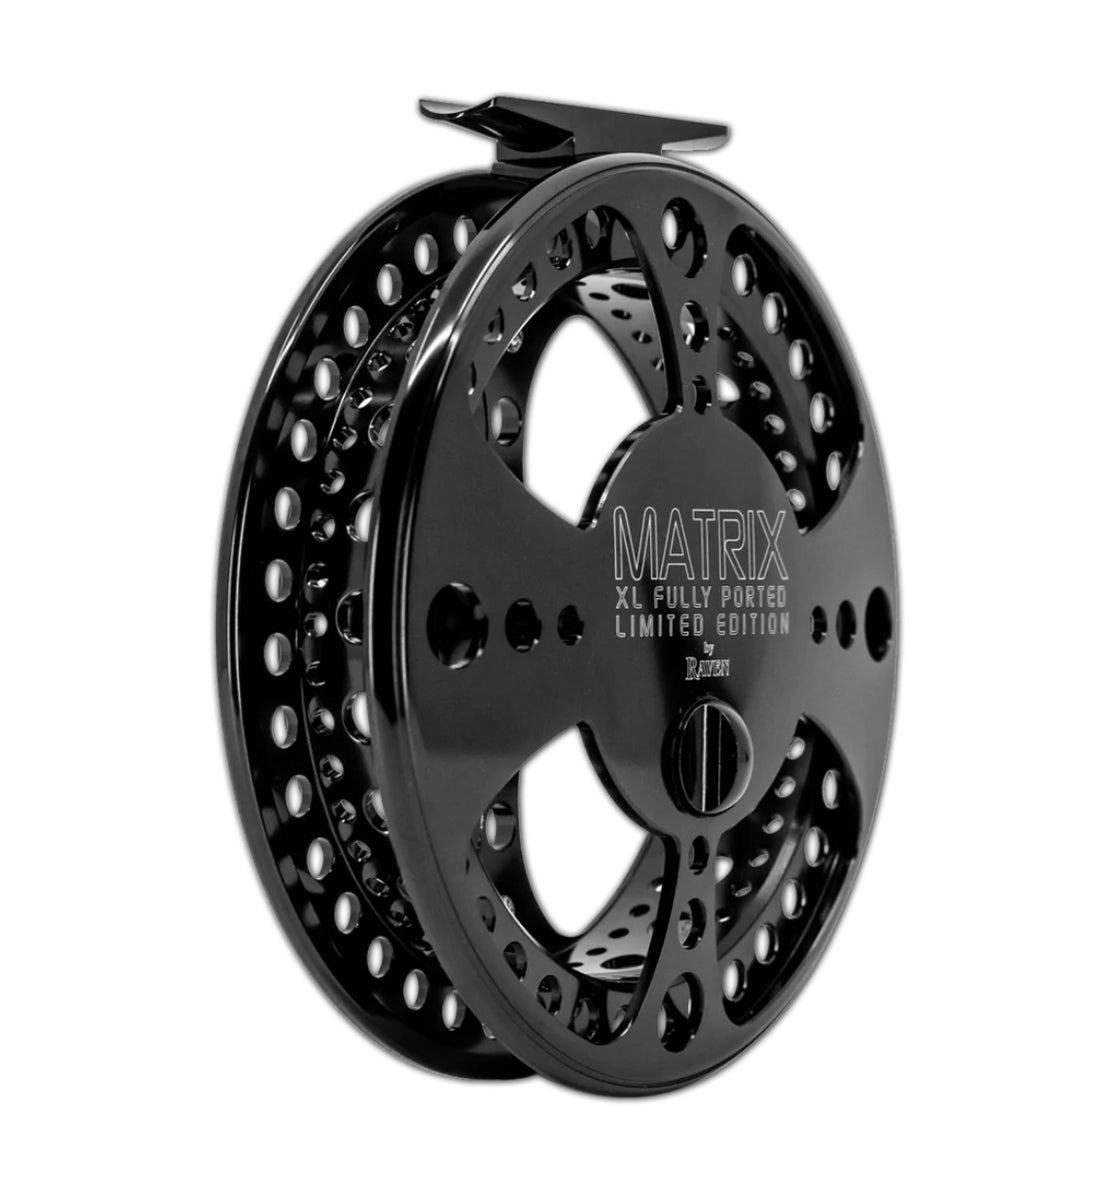 Raven Matrix XL Limited Edition Fully Ported 5 1/8” Centerpin Float Fi